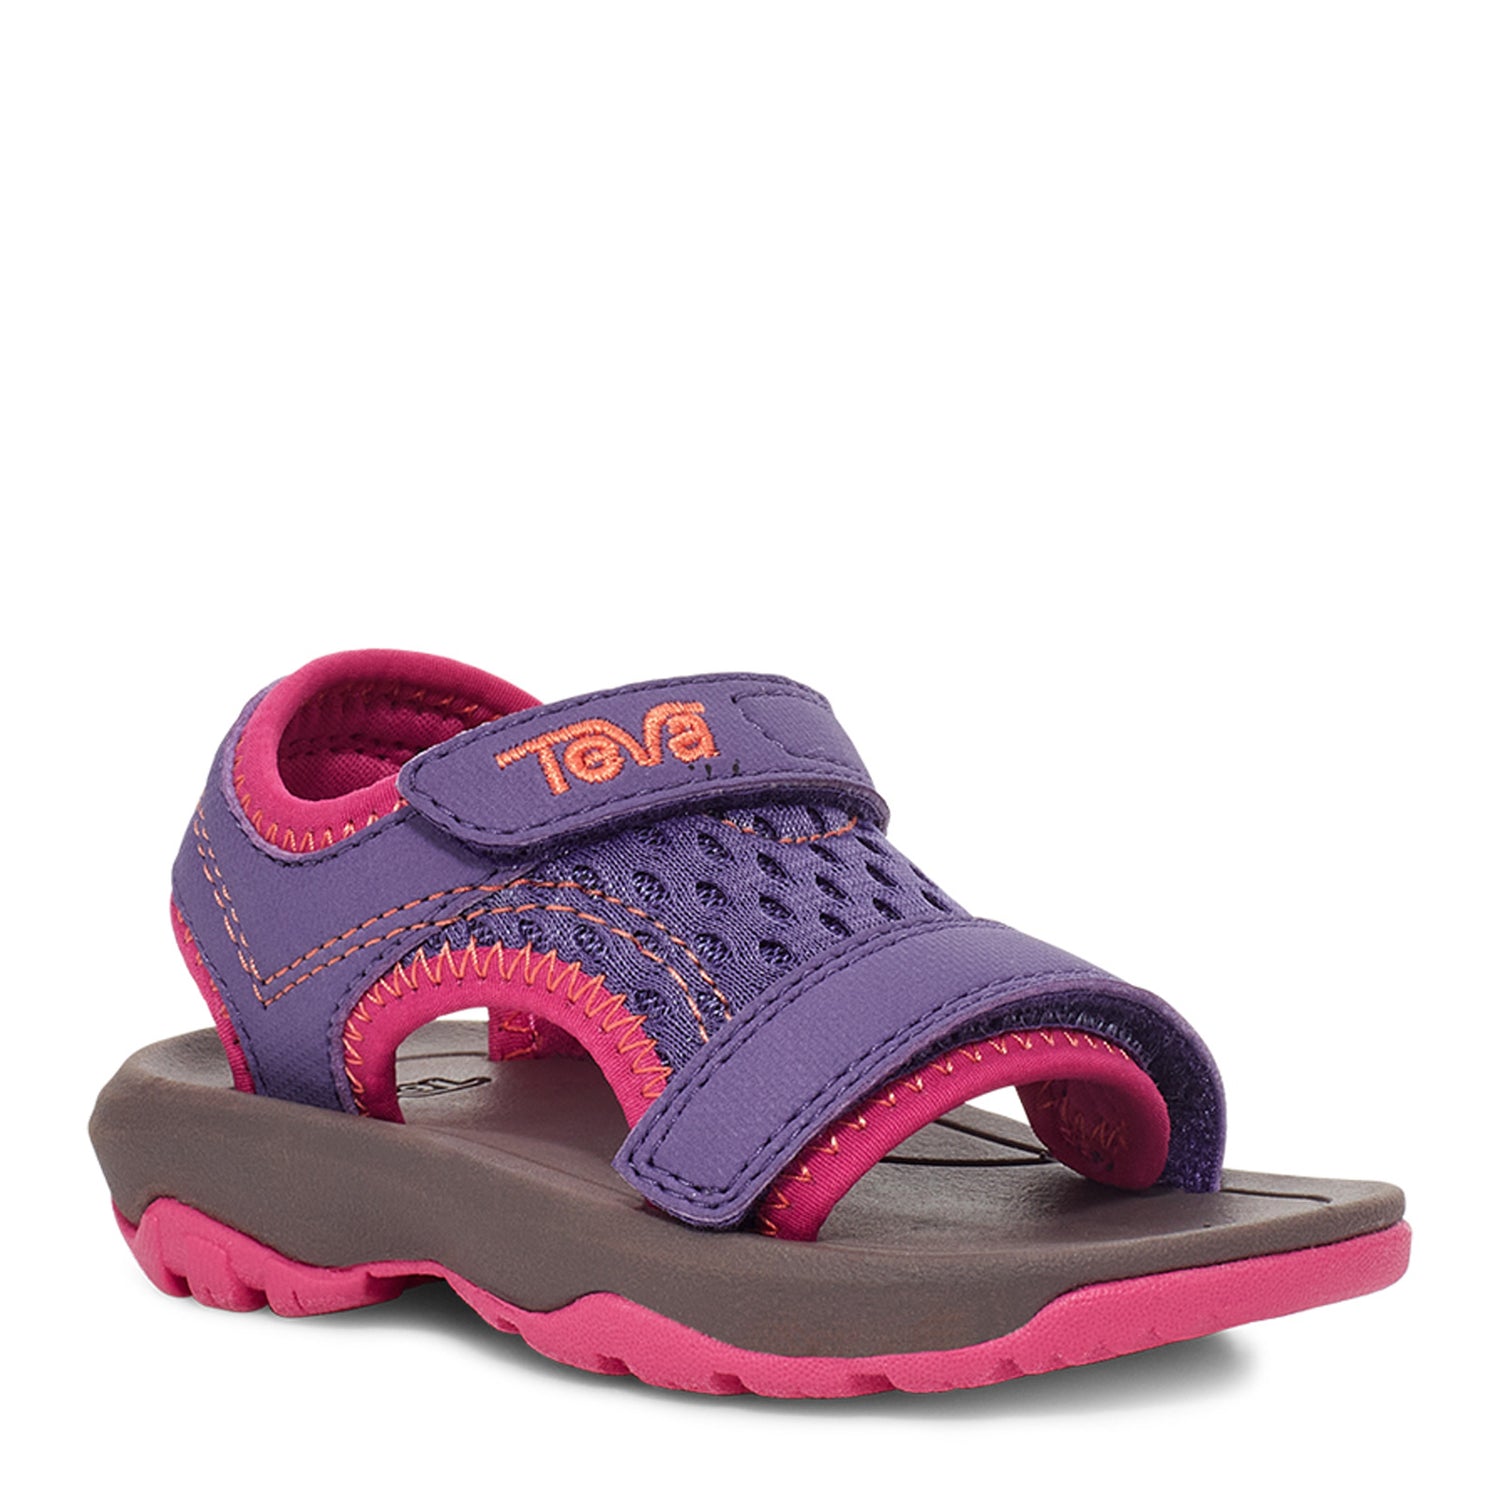 Peltz Shoes  Baby Girl's Teva Psyclone XLT - Toddler Imperial Palace 1019538T-IPLC